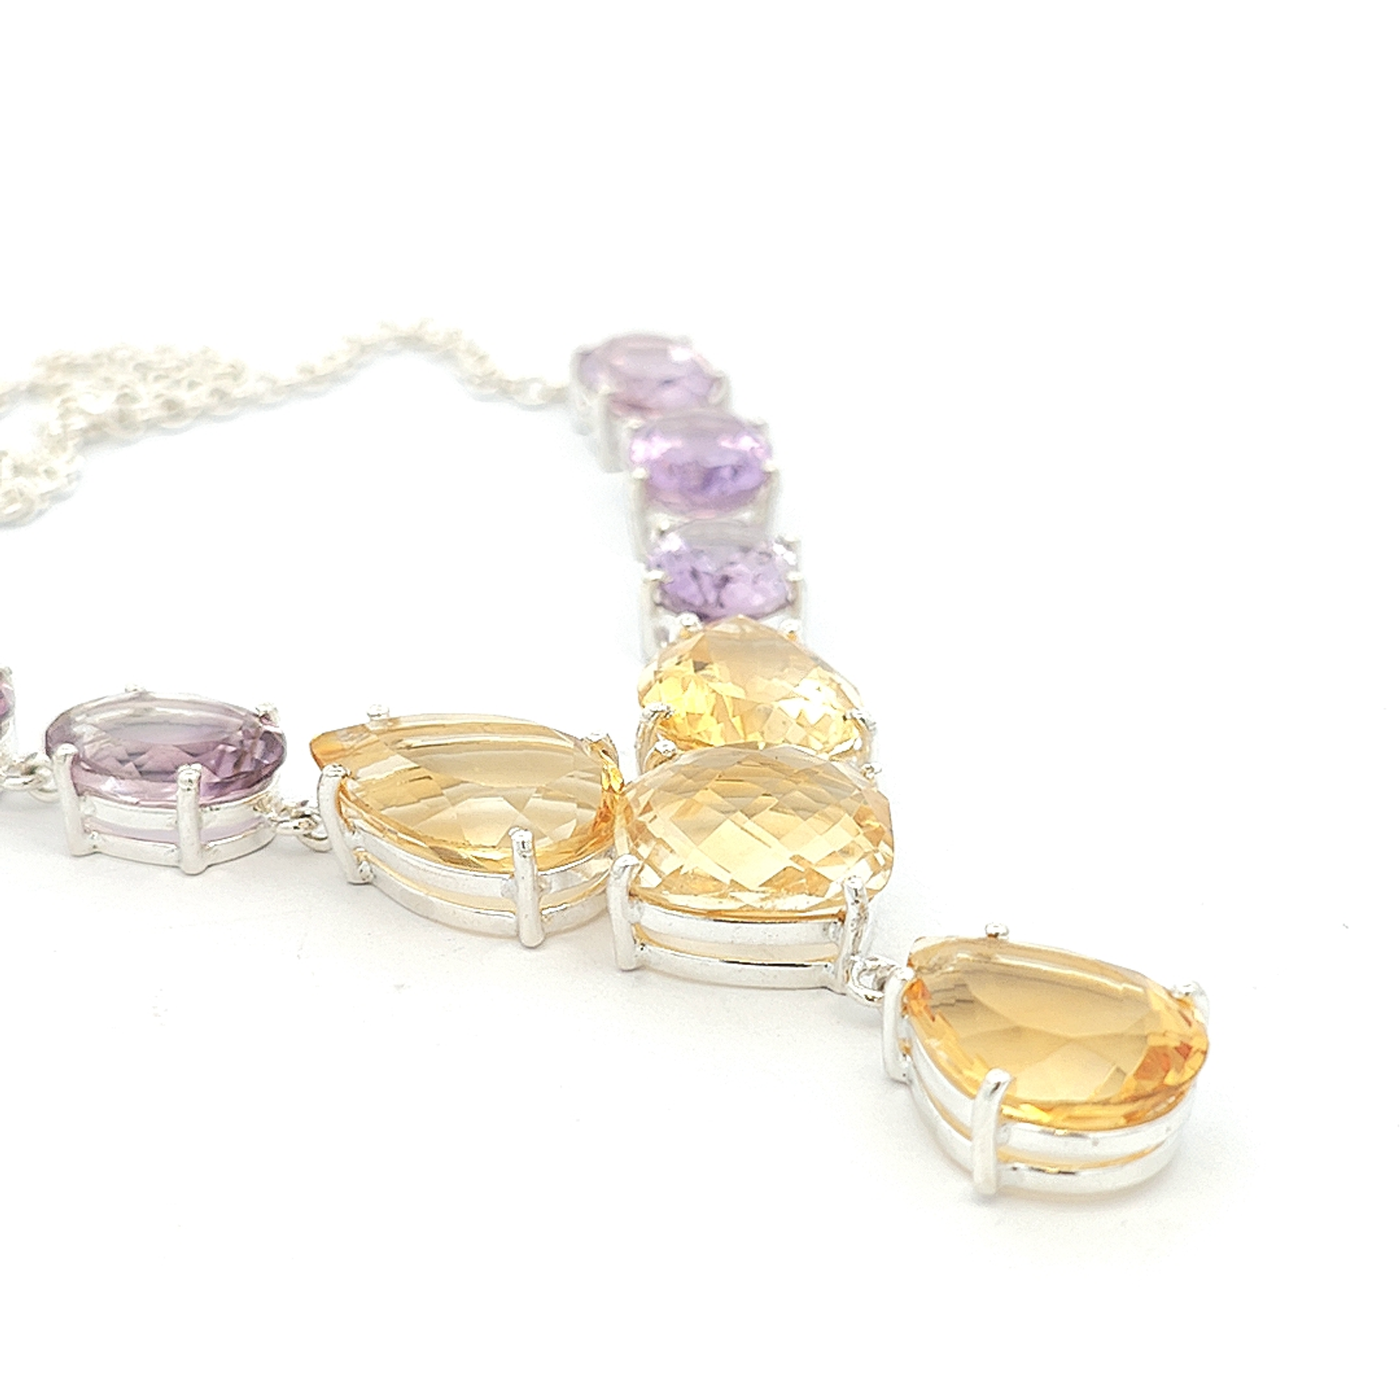 Citrine and Amethyst Necklace - Lettie - boothandbooth